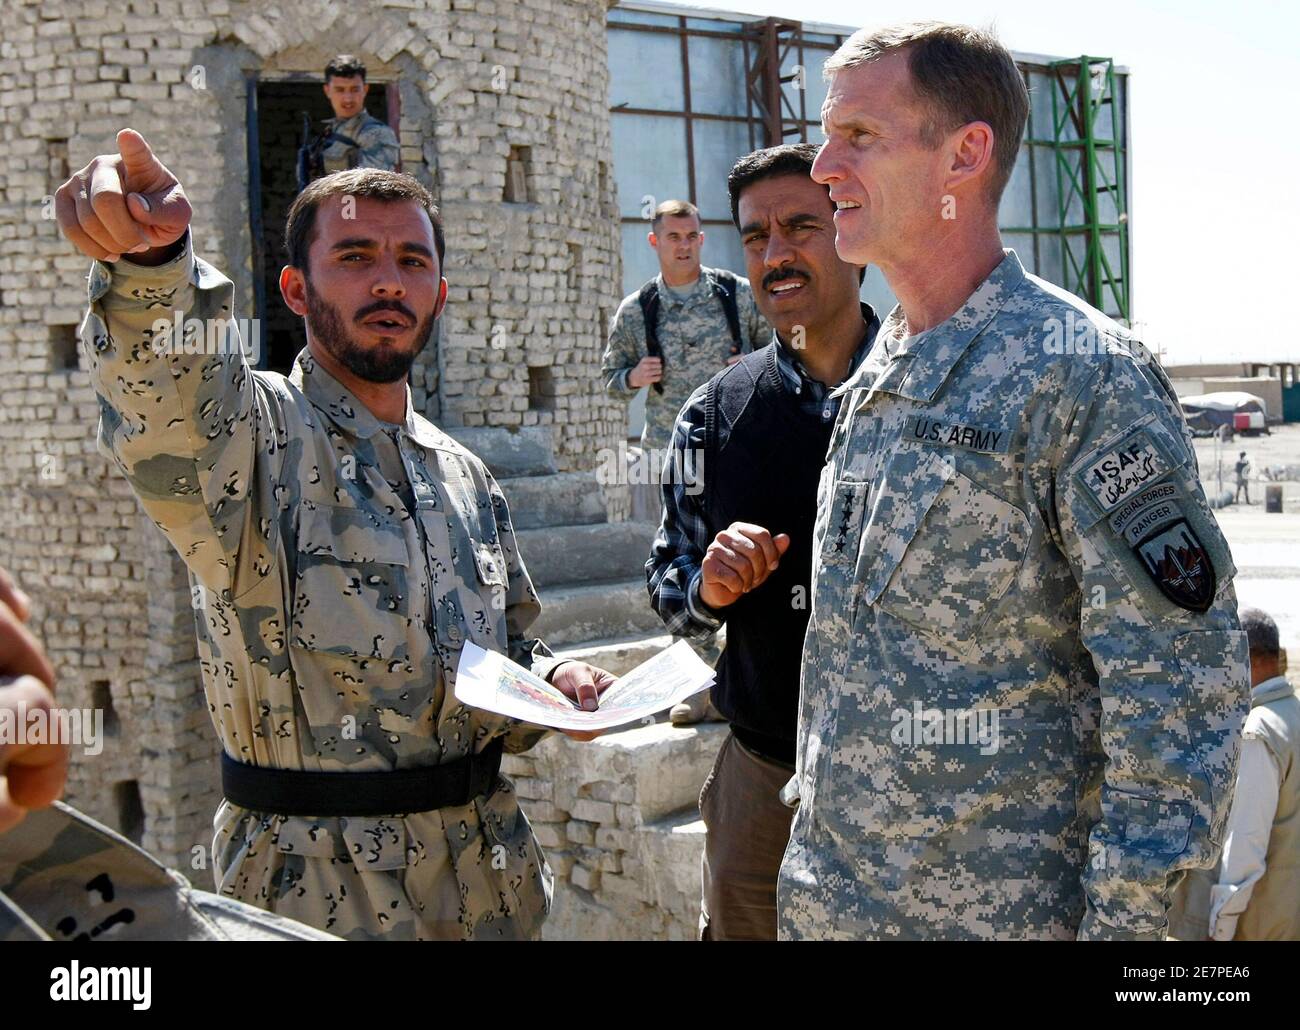 General Stanley McChrystal (R), commander of U.S. and NATO forces in Afghanistan, receives a briefing from Afghan border police commander Colonel Abdul Razziq during a visit to the Afghan border with Pakistan, near Spin Boldak in Kandahar Province, southern Afghanistan, in this March 4, 2010 file photo. One of the most important trade routes in Asia was closed last week while a boyish-looking man everyone calls "the general" showed around the commander of U.S. and NATO forces in Afghanistan. Picture taken March 4, 2010.   To match feature AFGHANISTAN-BORDER/     REUTERS/Peter Graff  (AFGHANIST Stock Photo